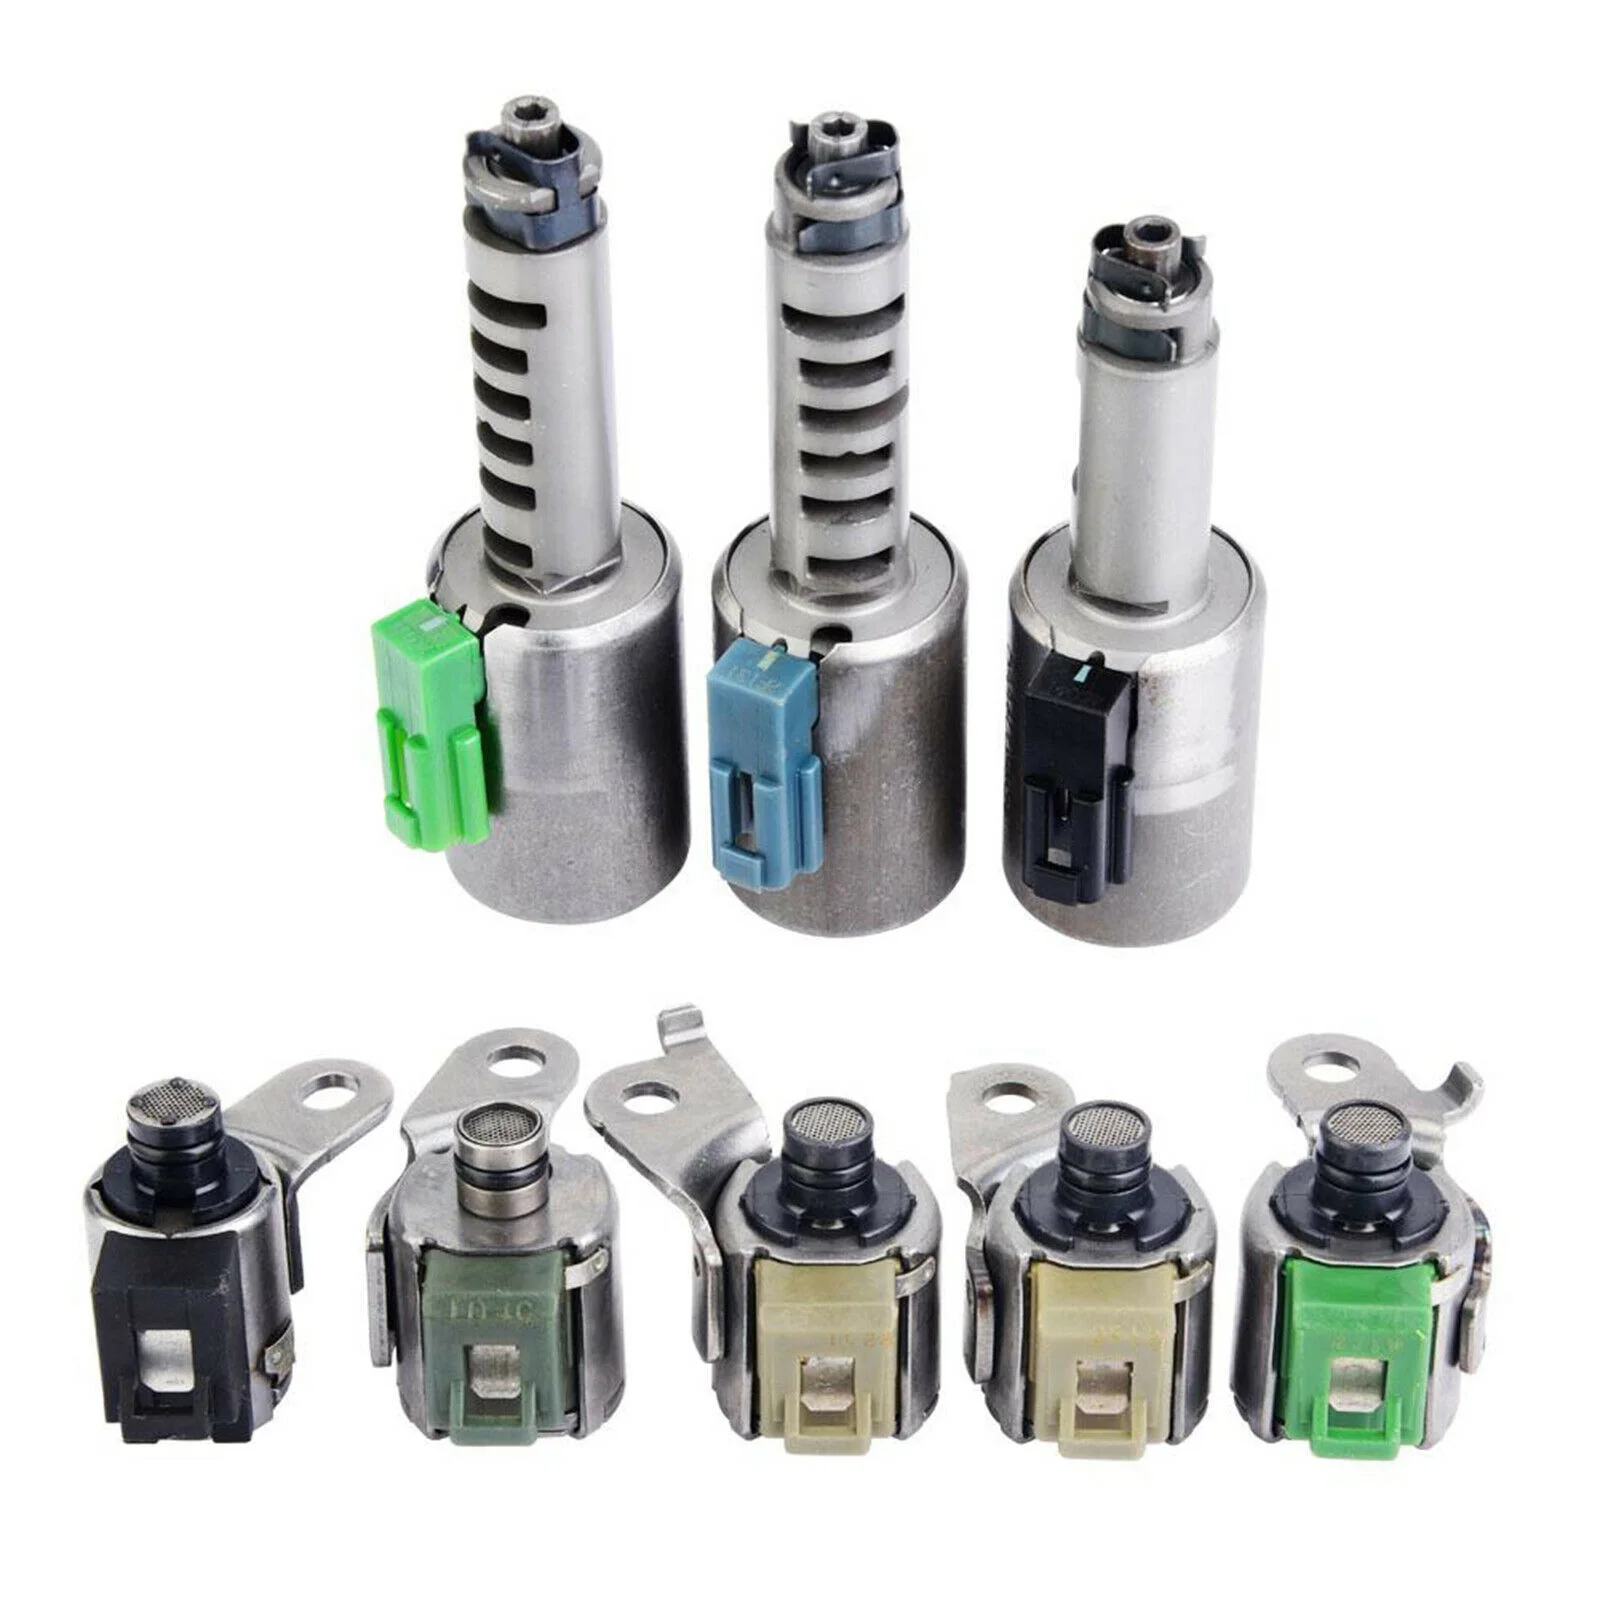 

8Pcs Transmission Solenoids Set AW55-50SN AW55-51SN AF33-5 AW235 RE5F22A Aw55-50sn Solenoid Valve for Volvo XC90 S60 S80 V50